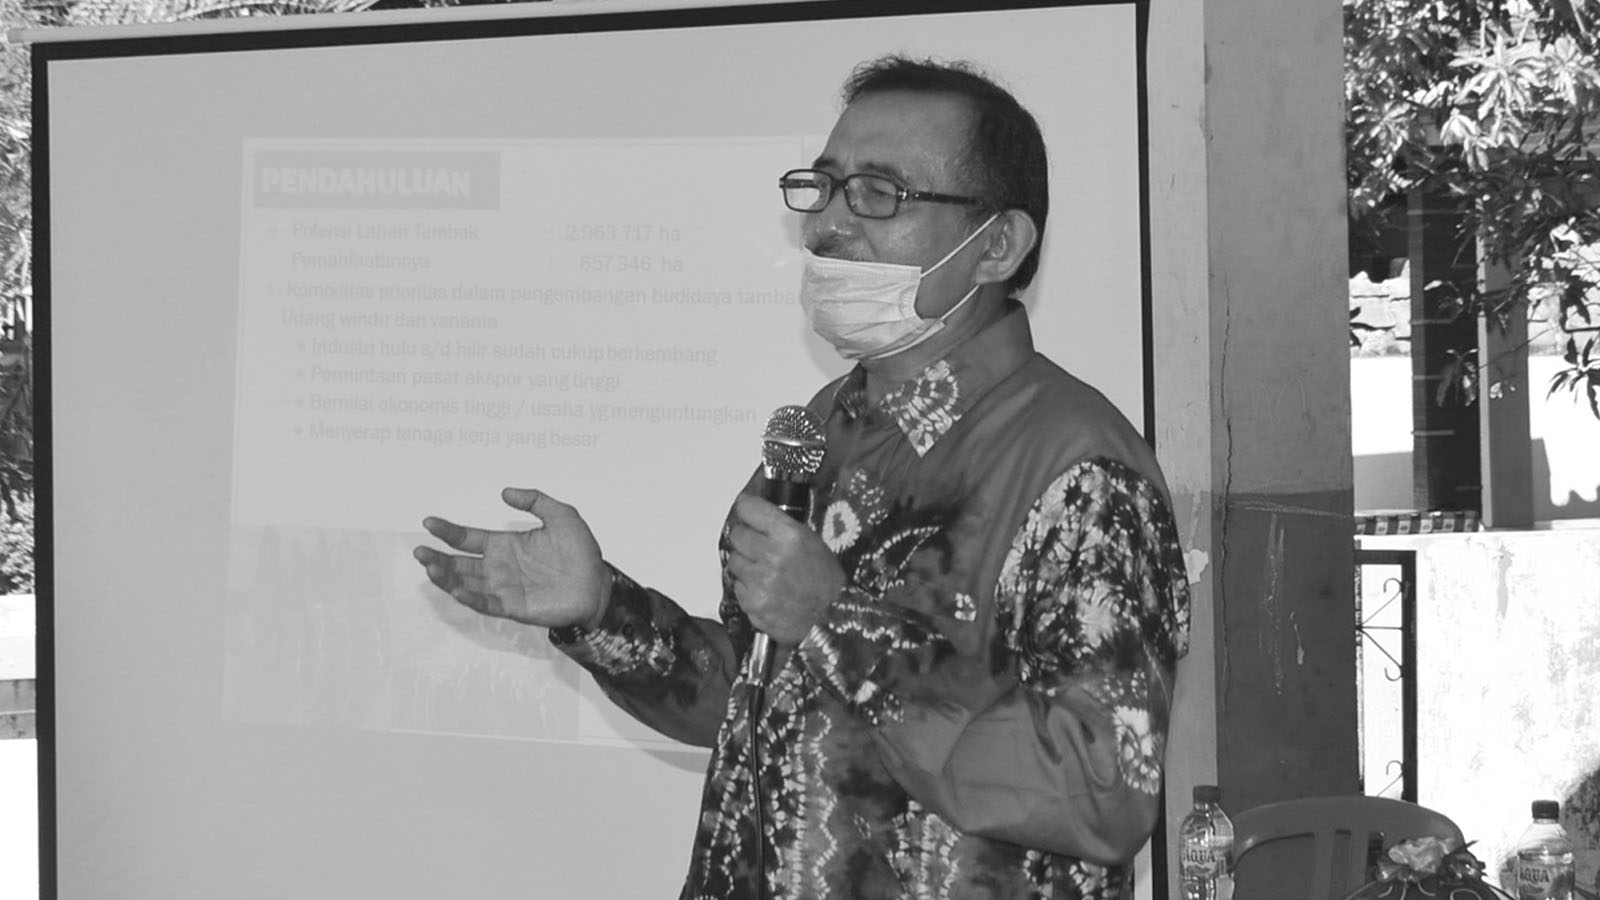 Ir. Muhammad Arief, M.Kes, Vice Dean II for 2015-2020 period of Faculty of Fisheries and Marine Sciences during a presentation in a community service activity (Photo: By courtesy)